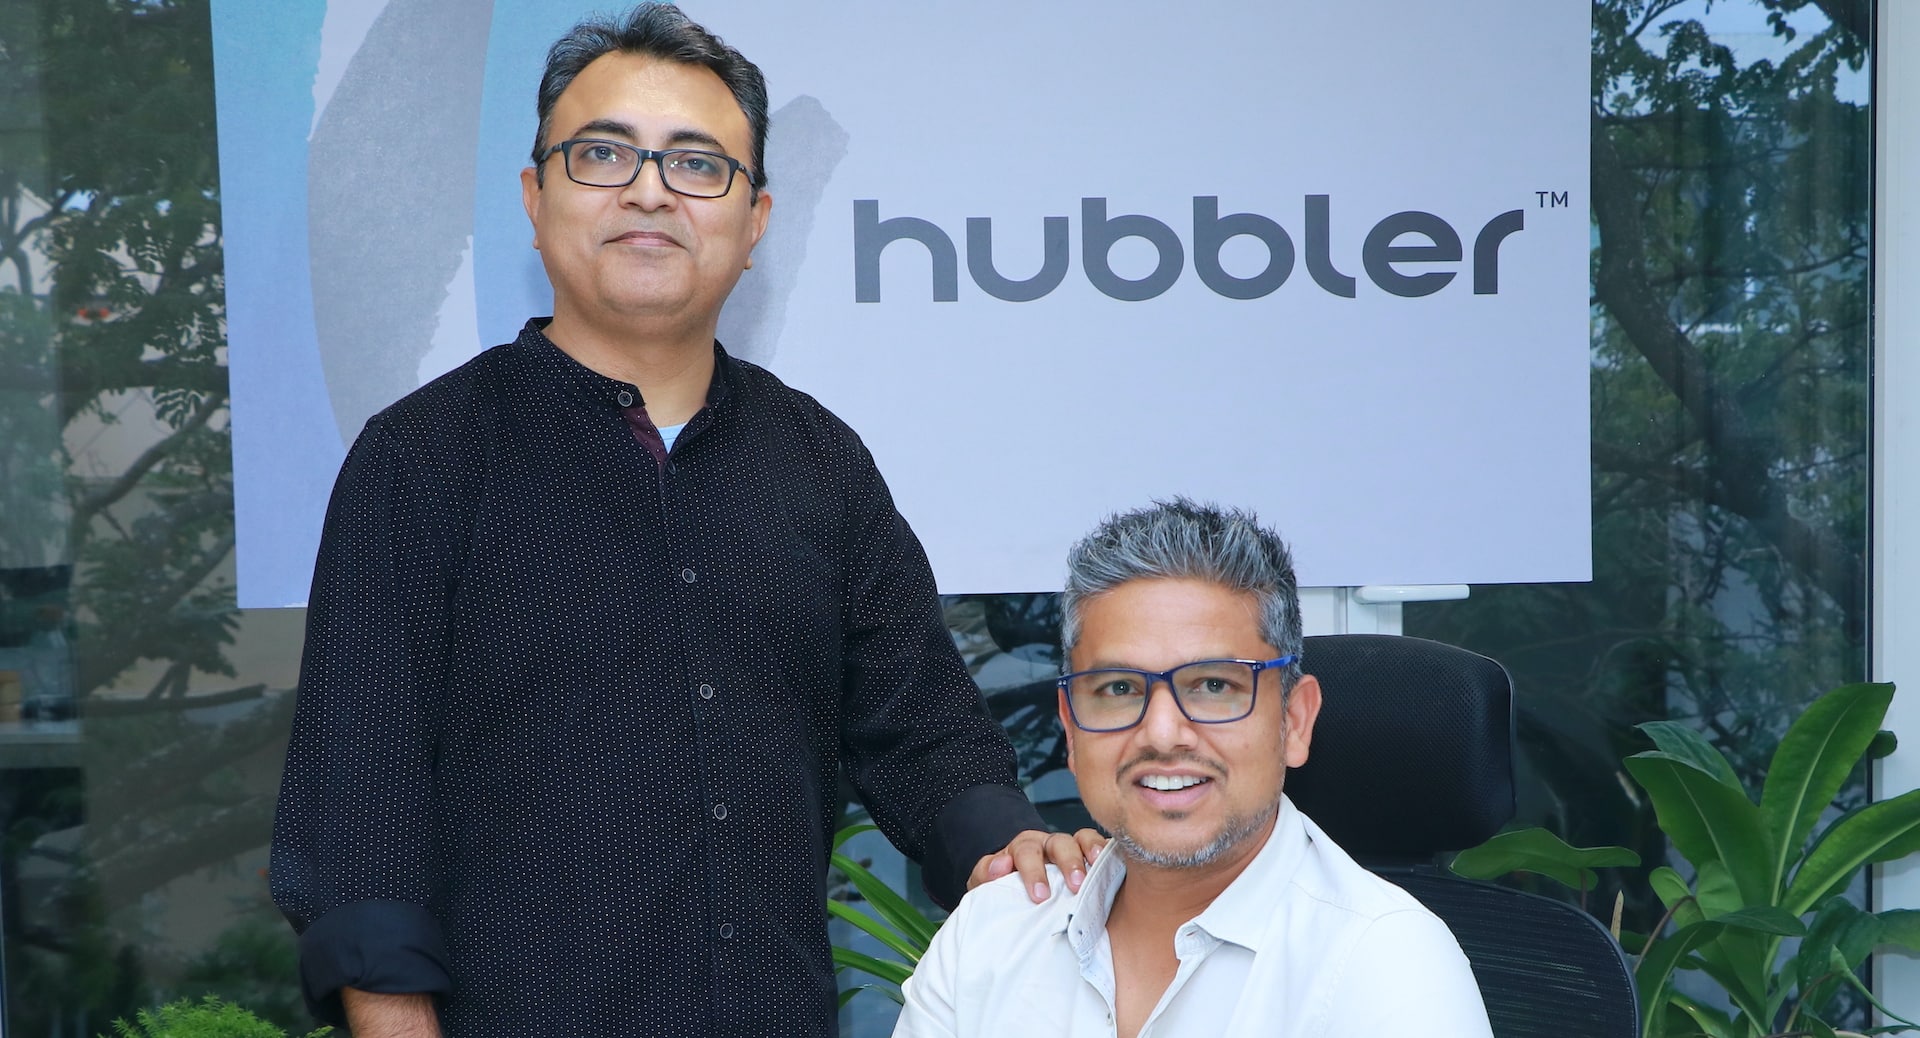 Hubbler's Chief Growth Officer Rishi Jha and Founder Vinay Agrrawal